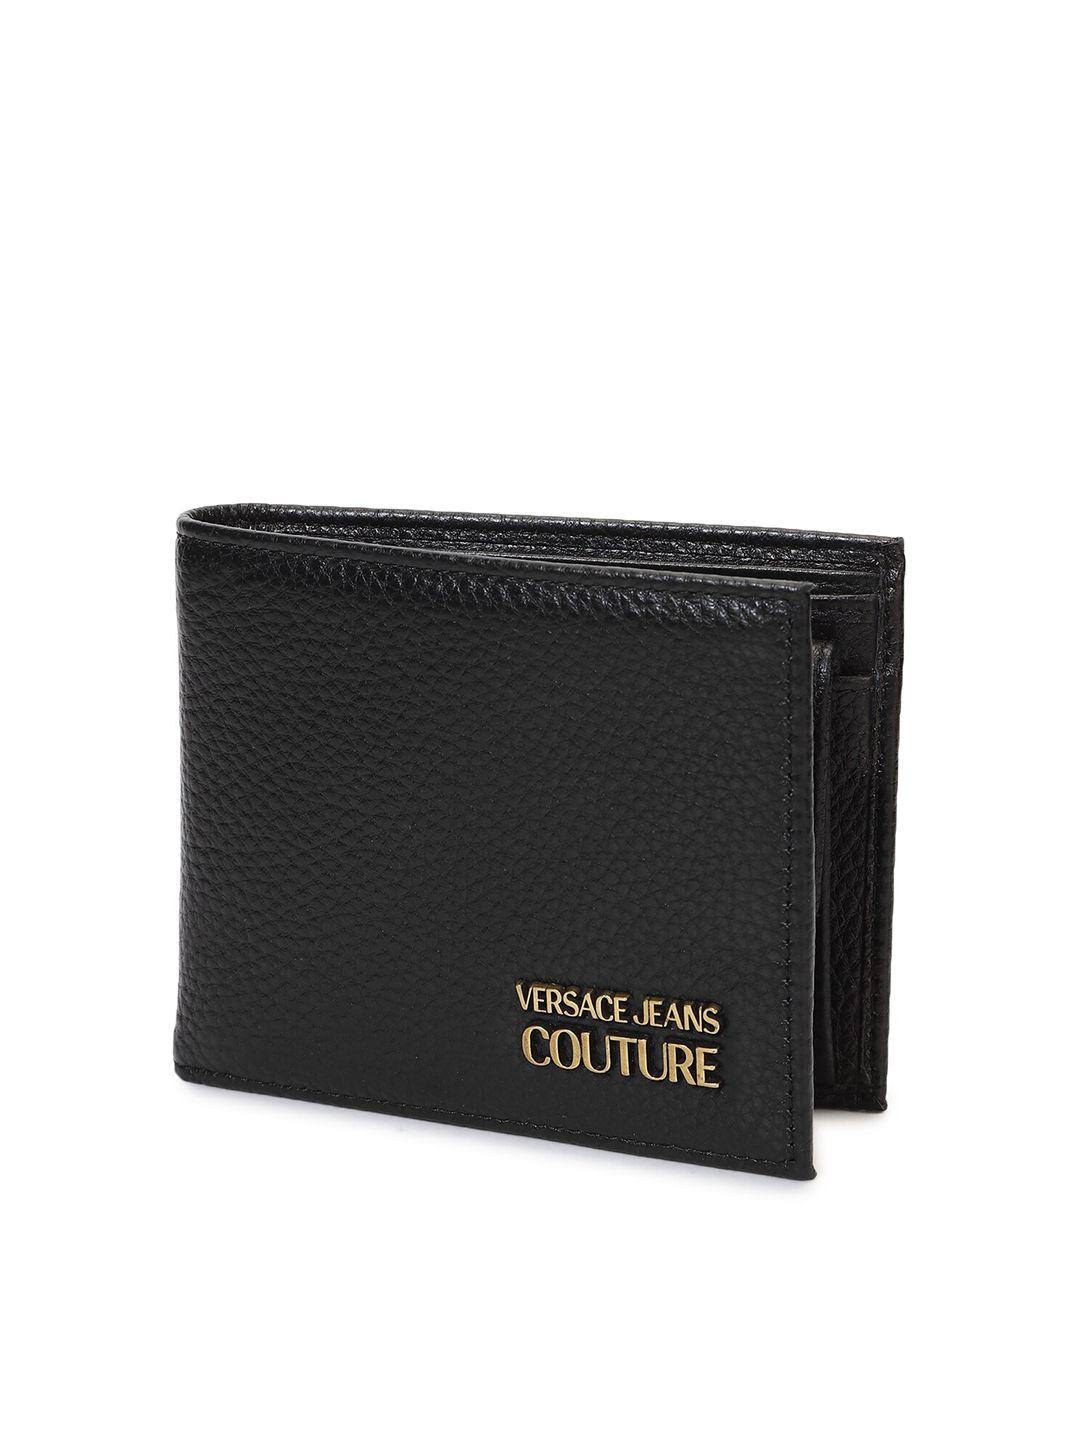 versace-jeans-couture-men-black-&-gold-toned-textured-leather-two-fold-wallet